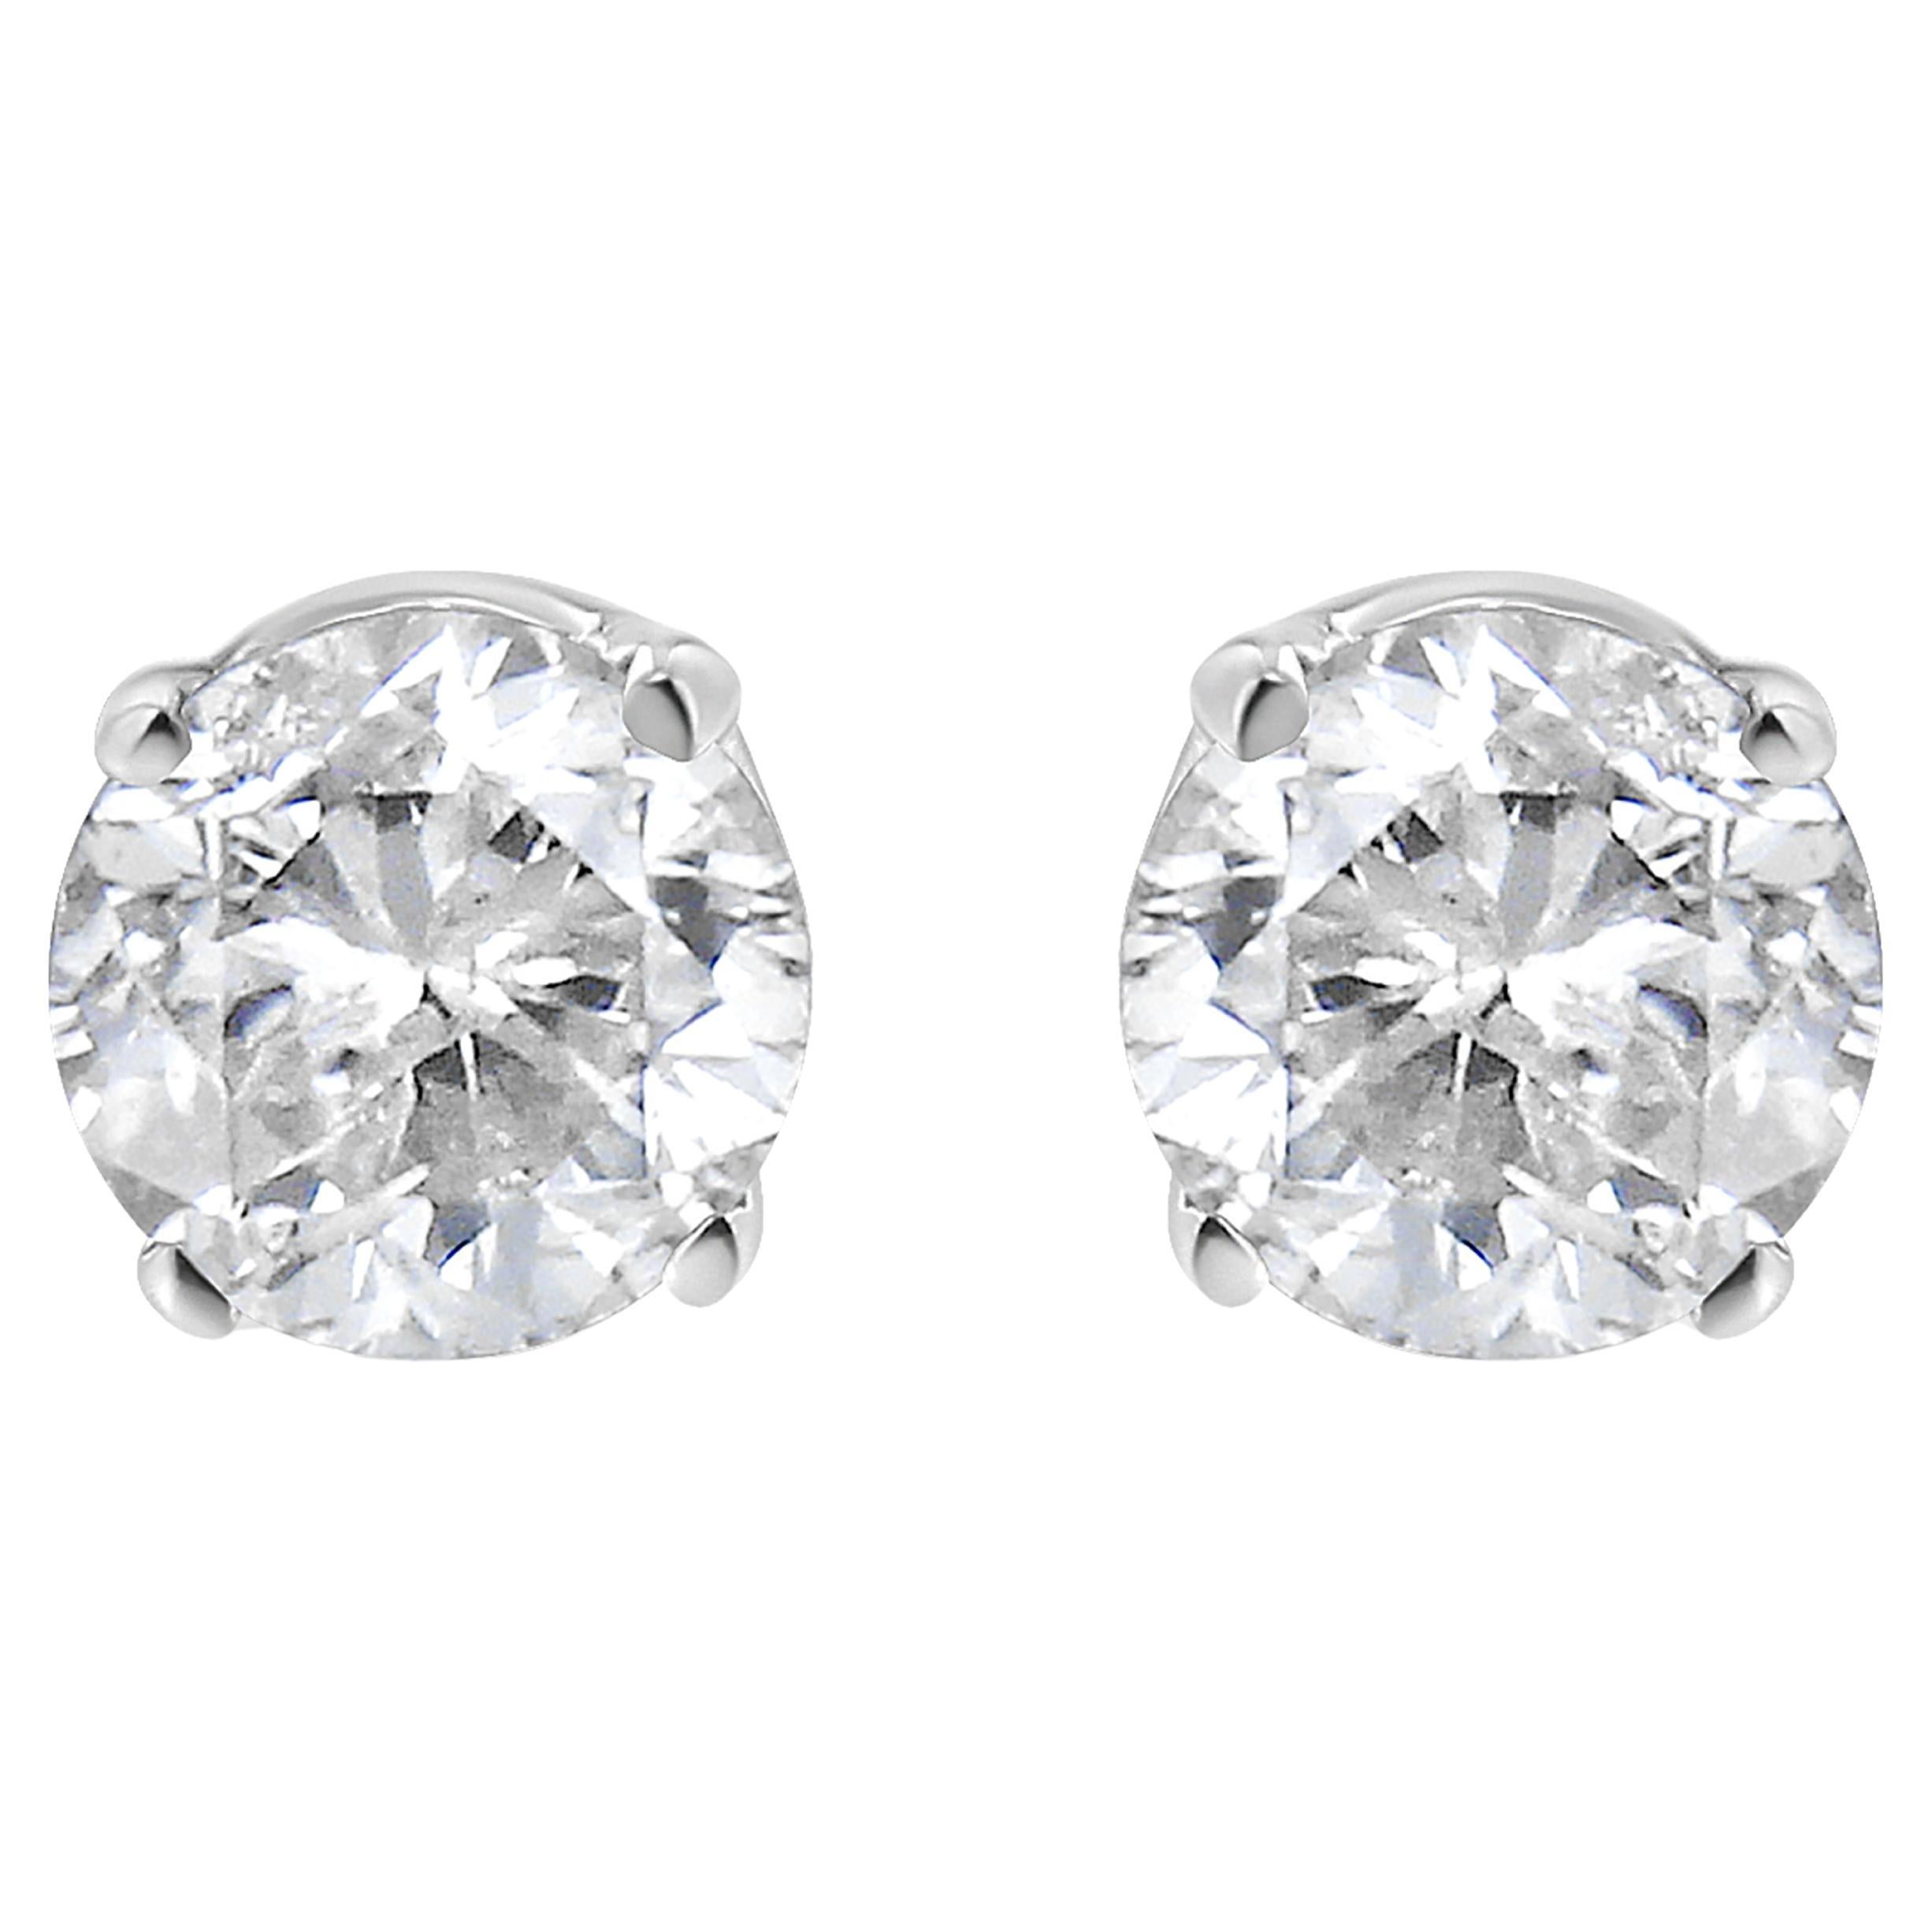 AGS Certified 14K White Gold 1.0 Carat Brilliant Round-Cut Diamond Stud Earrings For Sale